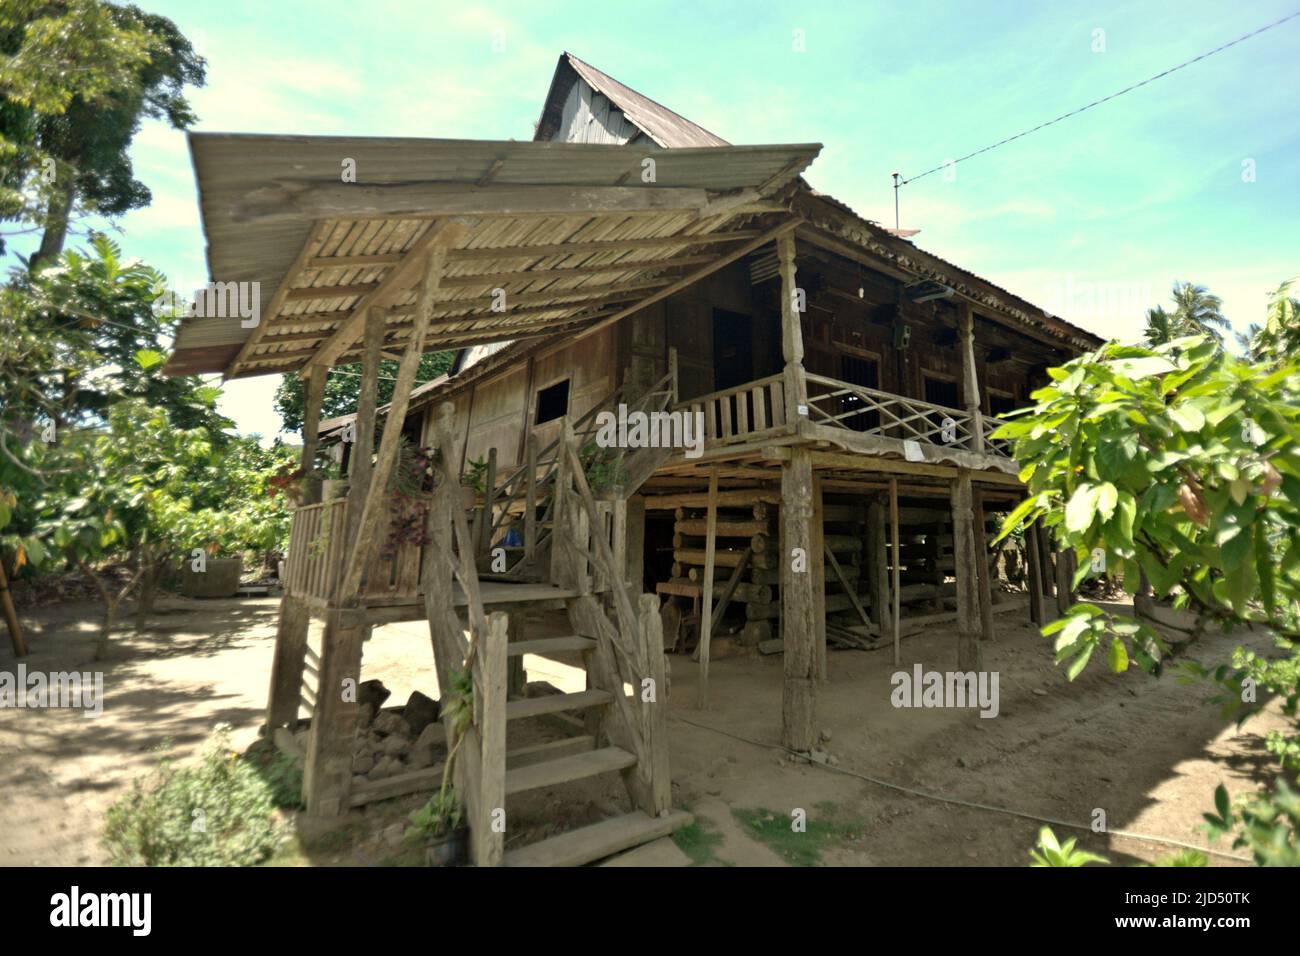 A wooden house that is designed and constructed to be earthquake-resistant in Banding Agung, Ogan Komering Ulu Selatan, South Sumatra, Indonesia. Stock Photo